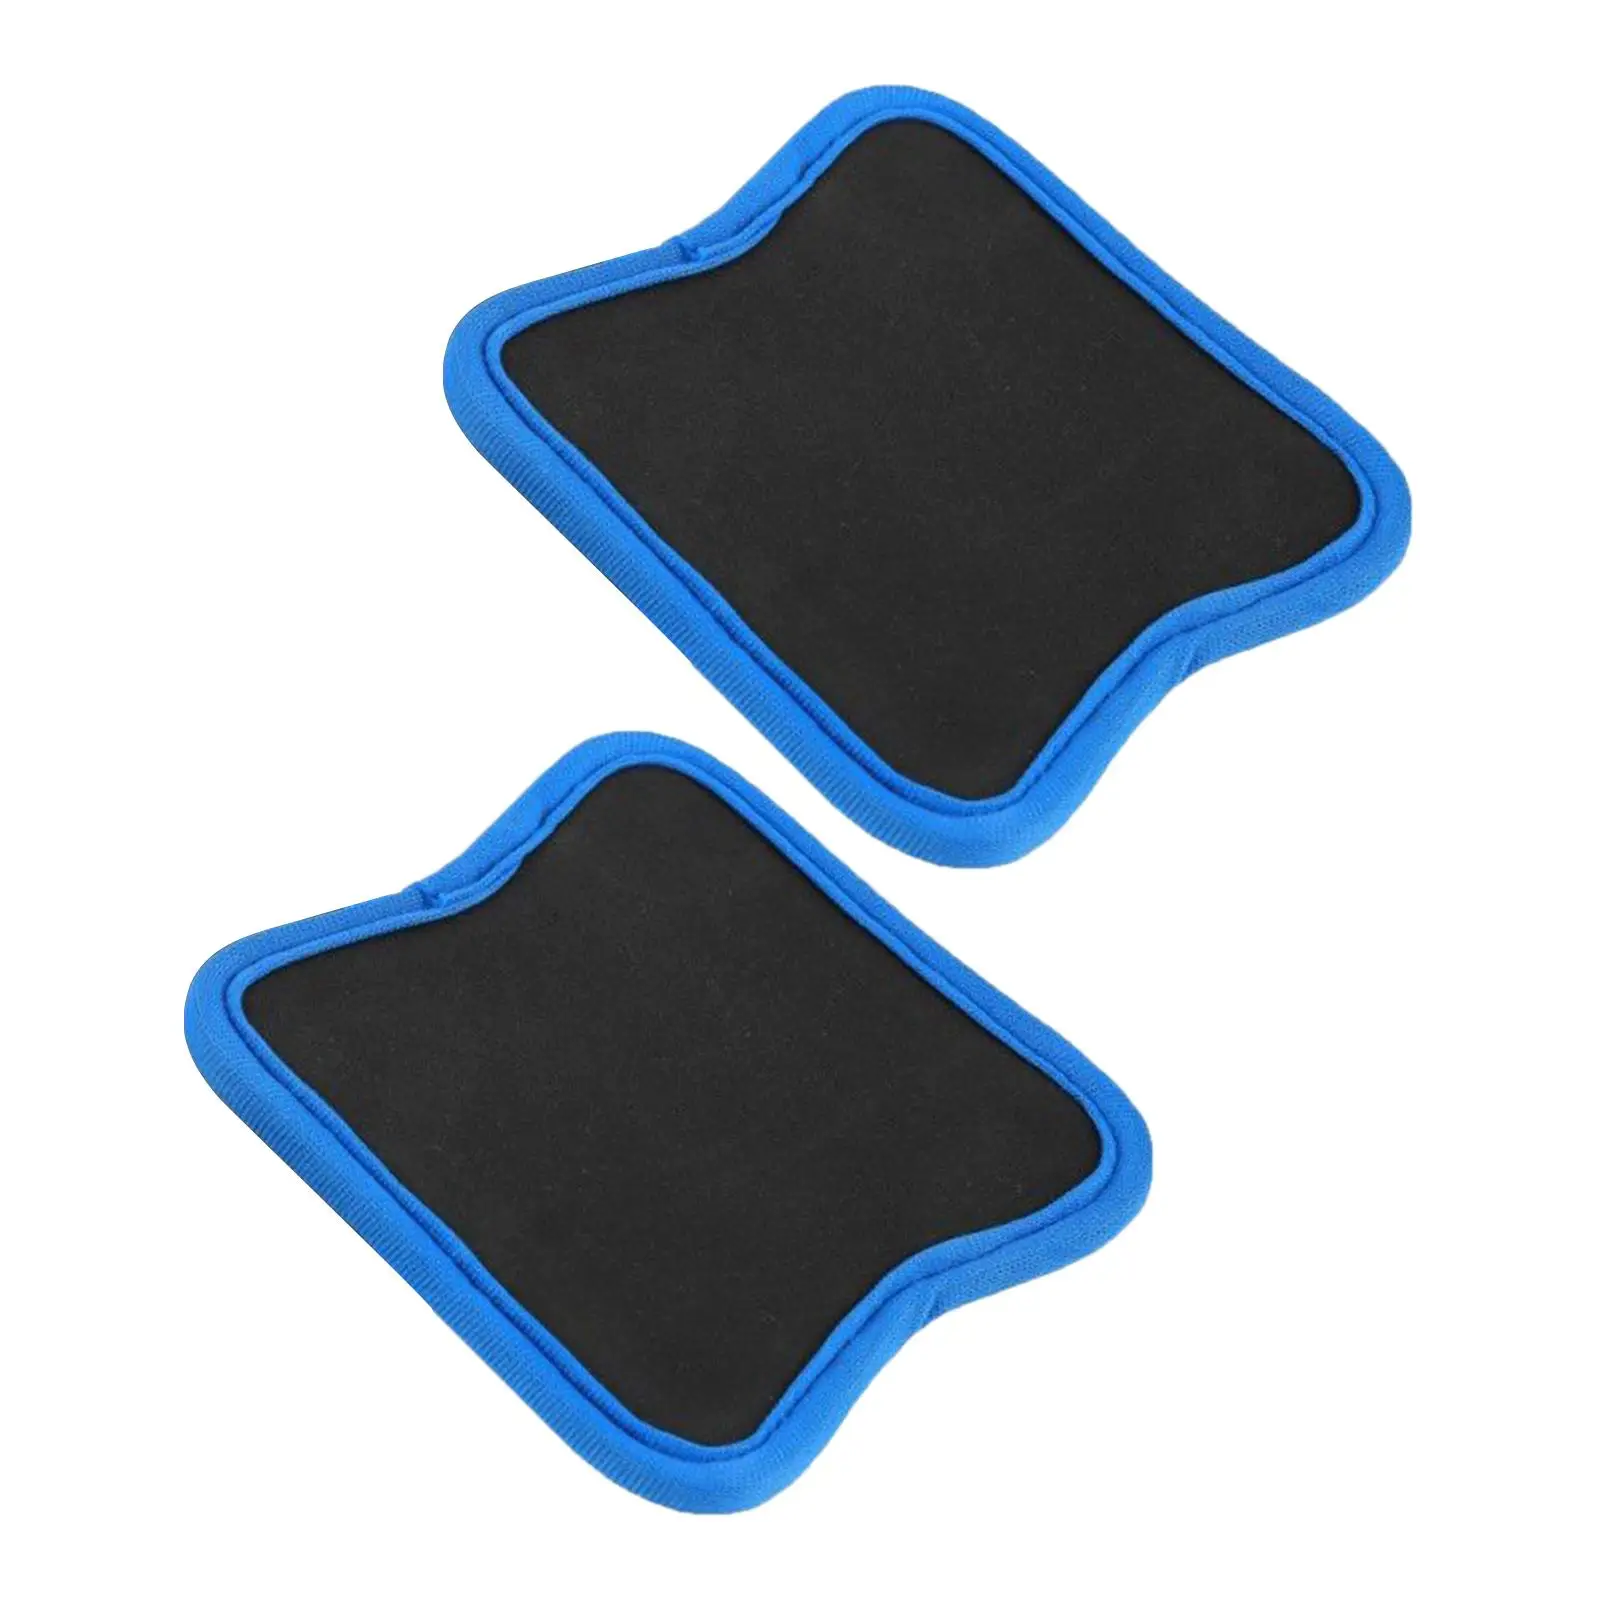 2 Pack Neoprene Grip Pads No Sweaty Hands Grip Pad Workout Pads Comfort Pull up for Sports Exercise Fitness Training Men